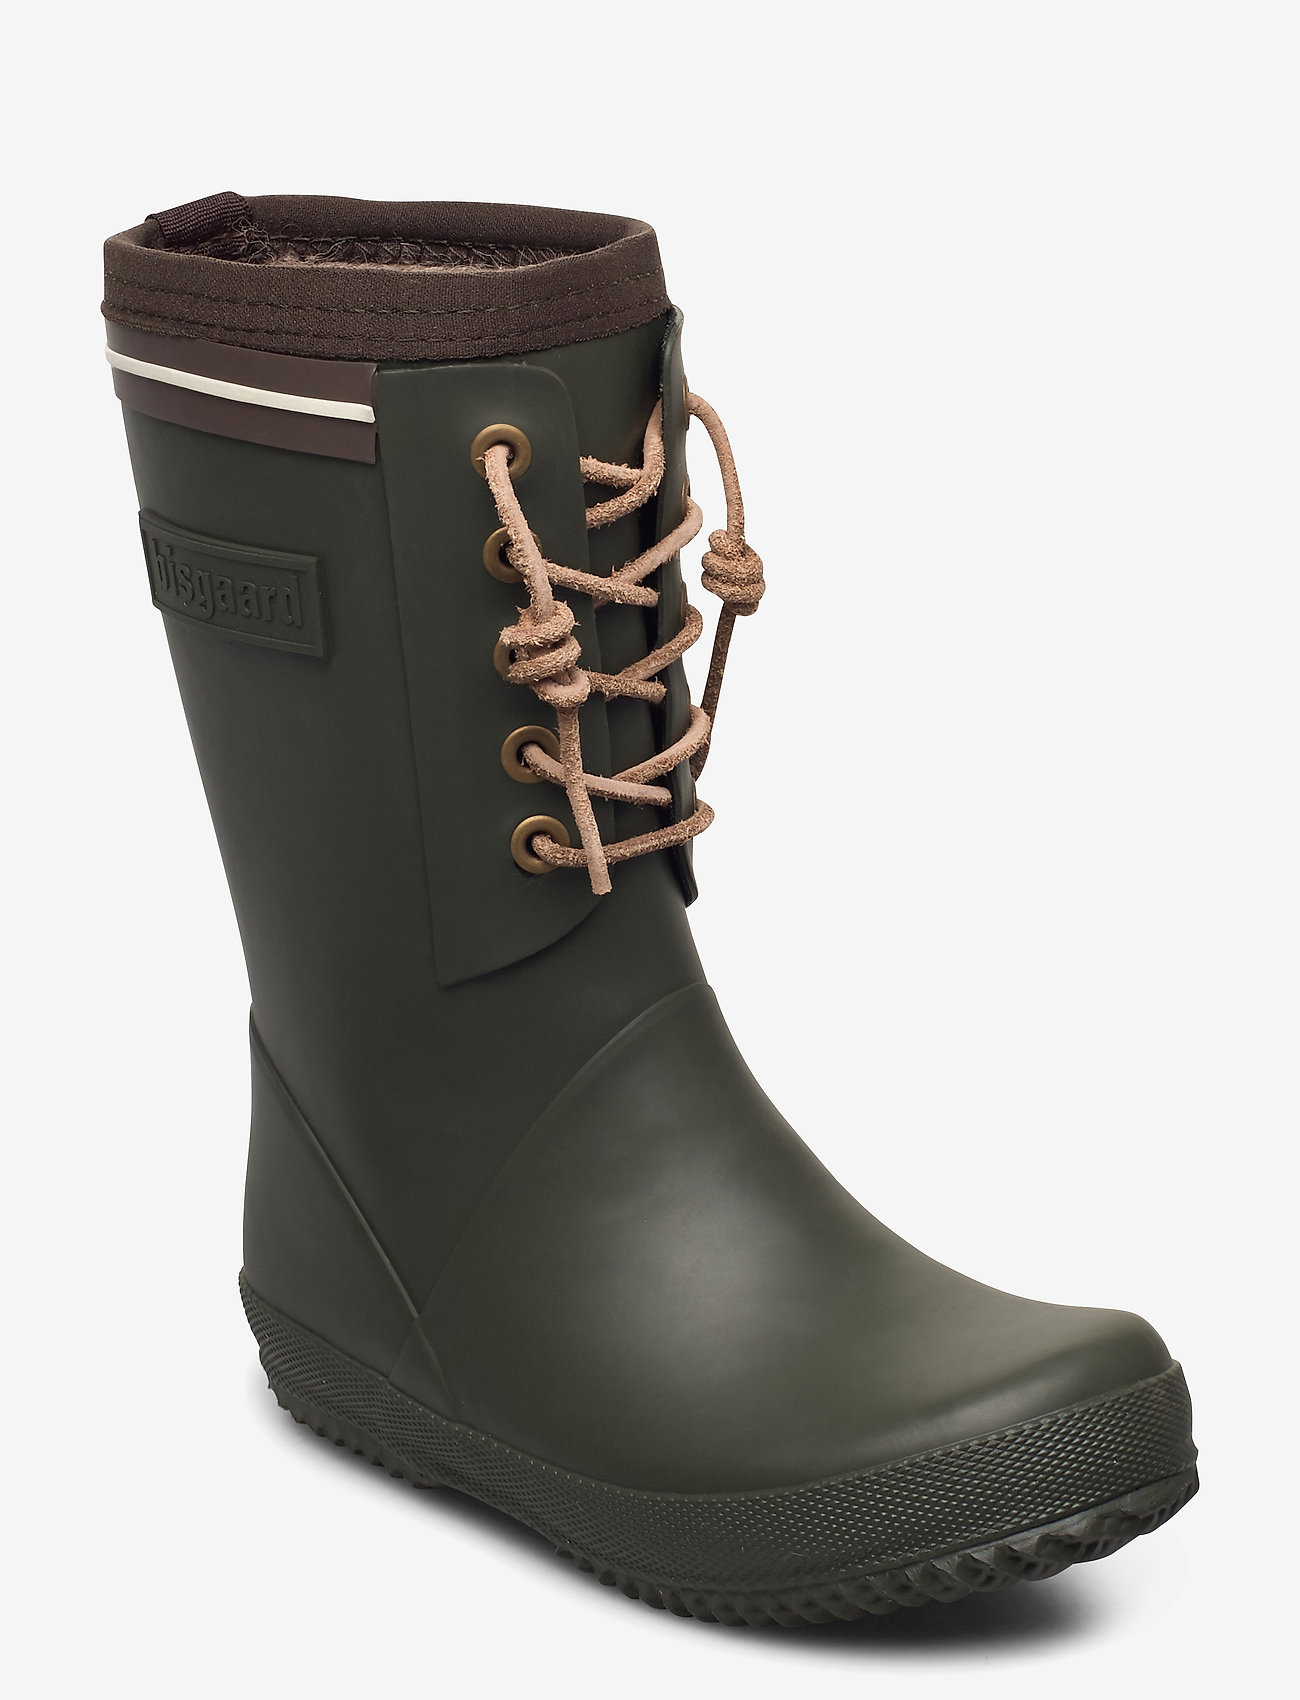 Bisgaard - bisgaard lace thermo - lined rubberboots - green - 0